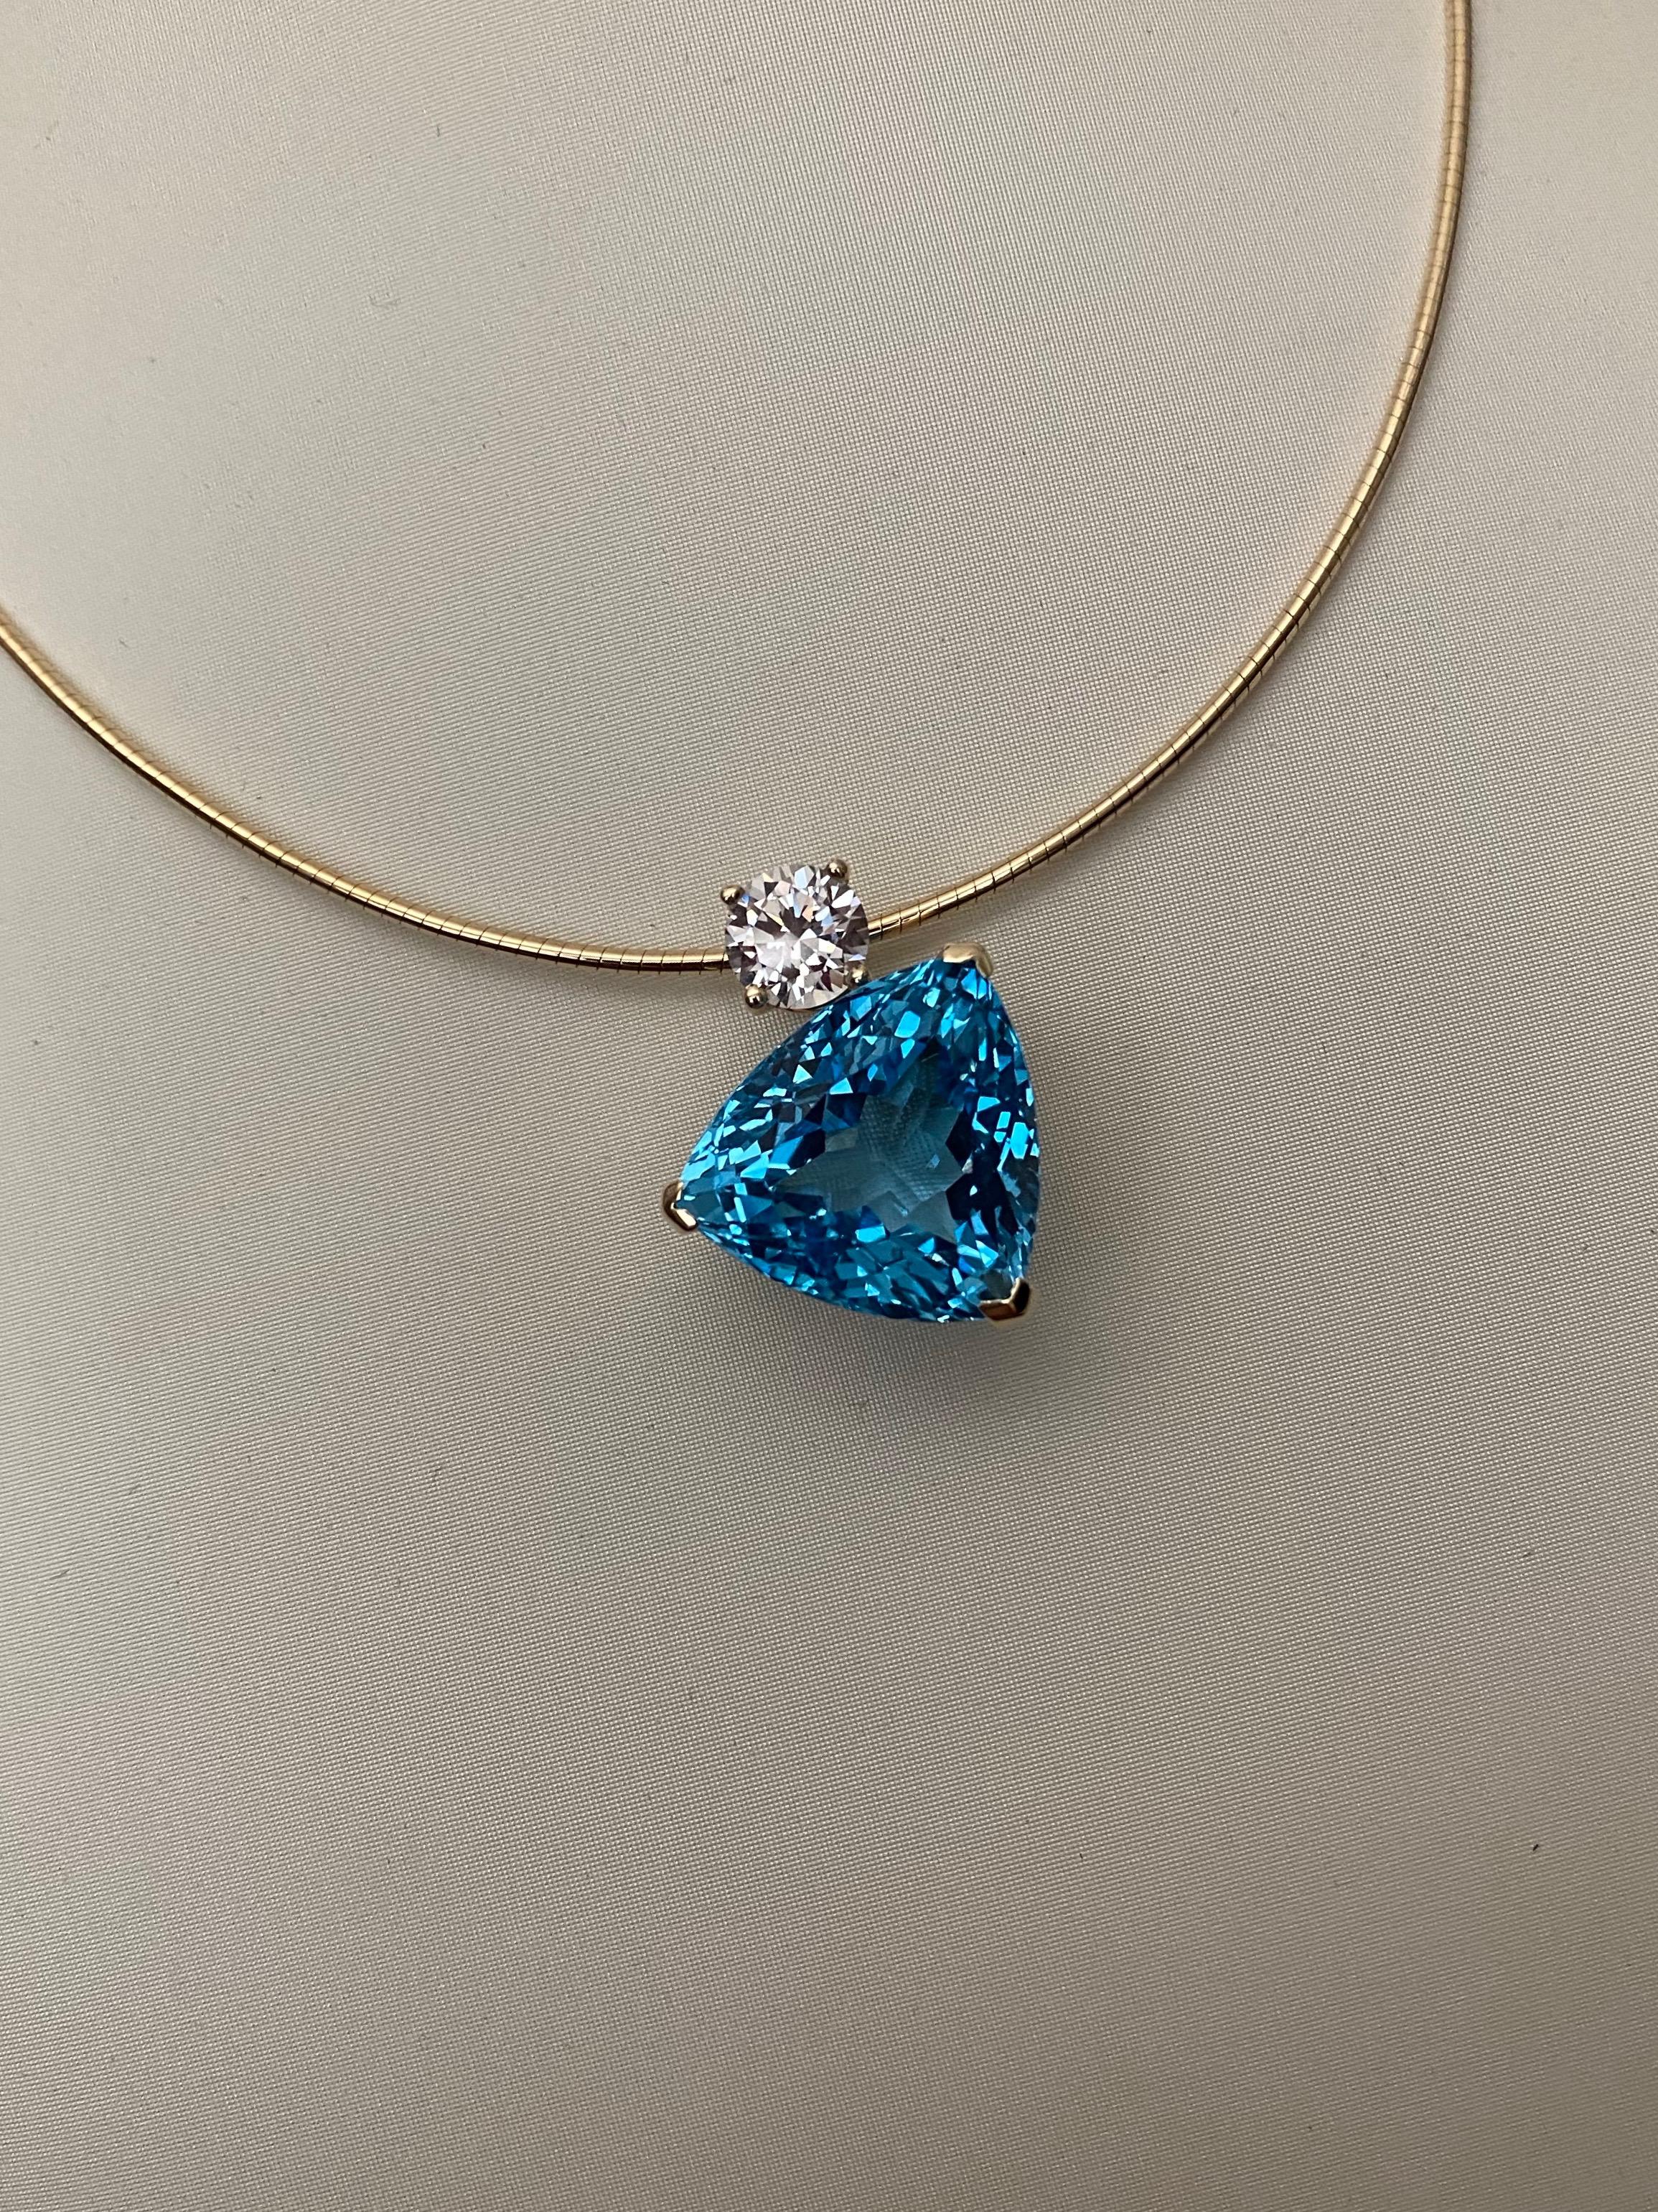 A trillion shaped Swiss blue topaz (origin: Thailand) is featured in this asymmetrical pendant.  The topaz weighs 43.18 carats. There are a multitude of tiny, diamond shaped facets placed in what is know as a Portuguese configuration.  The gem is a